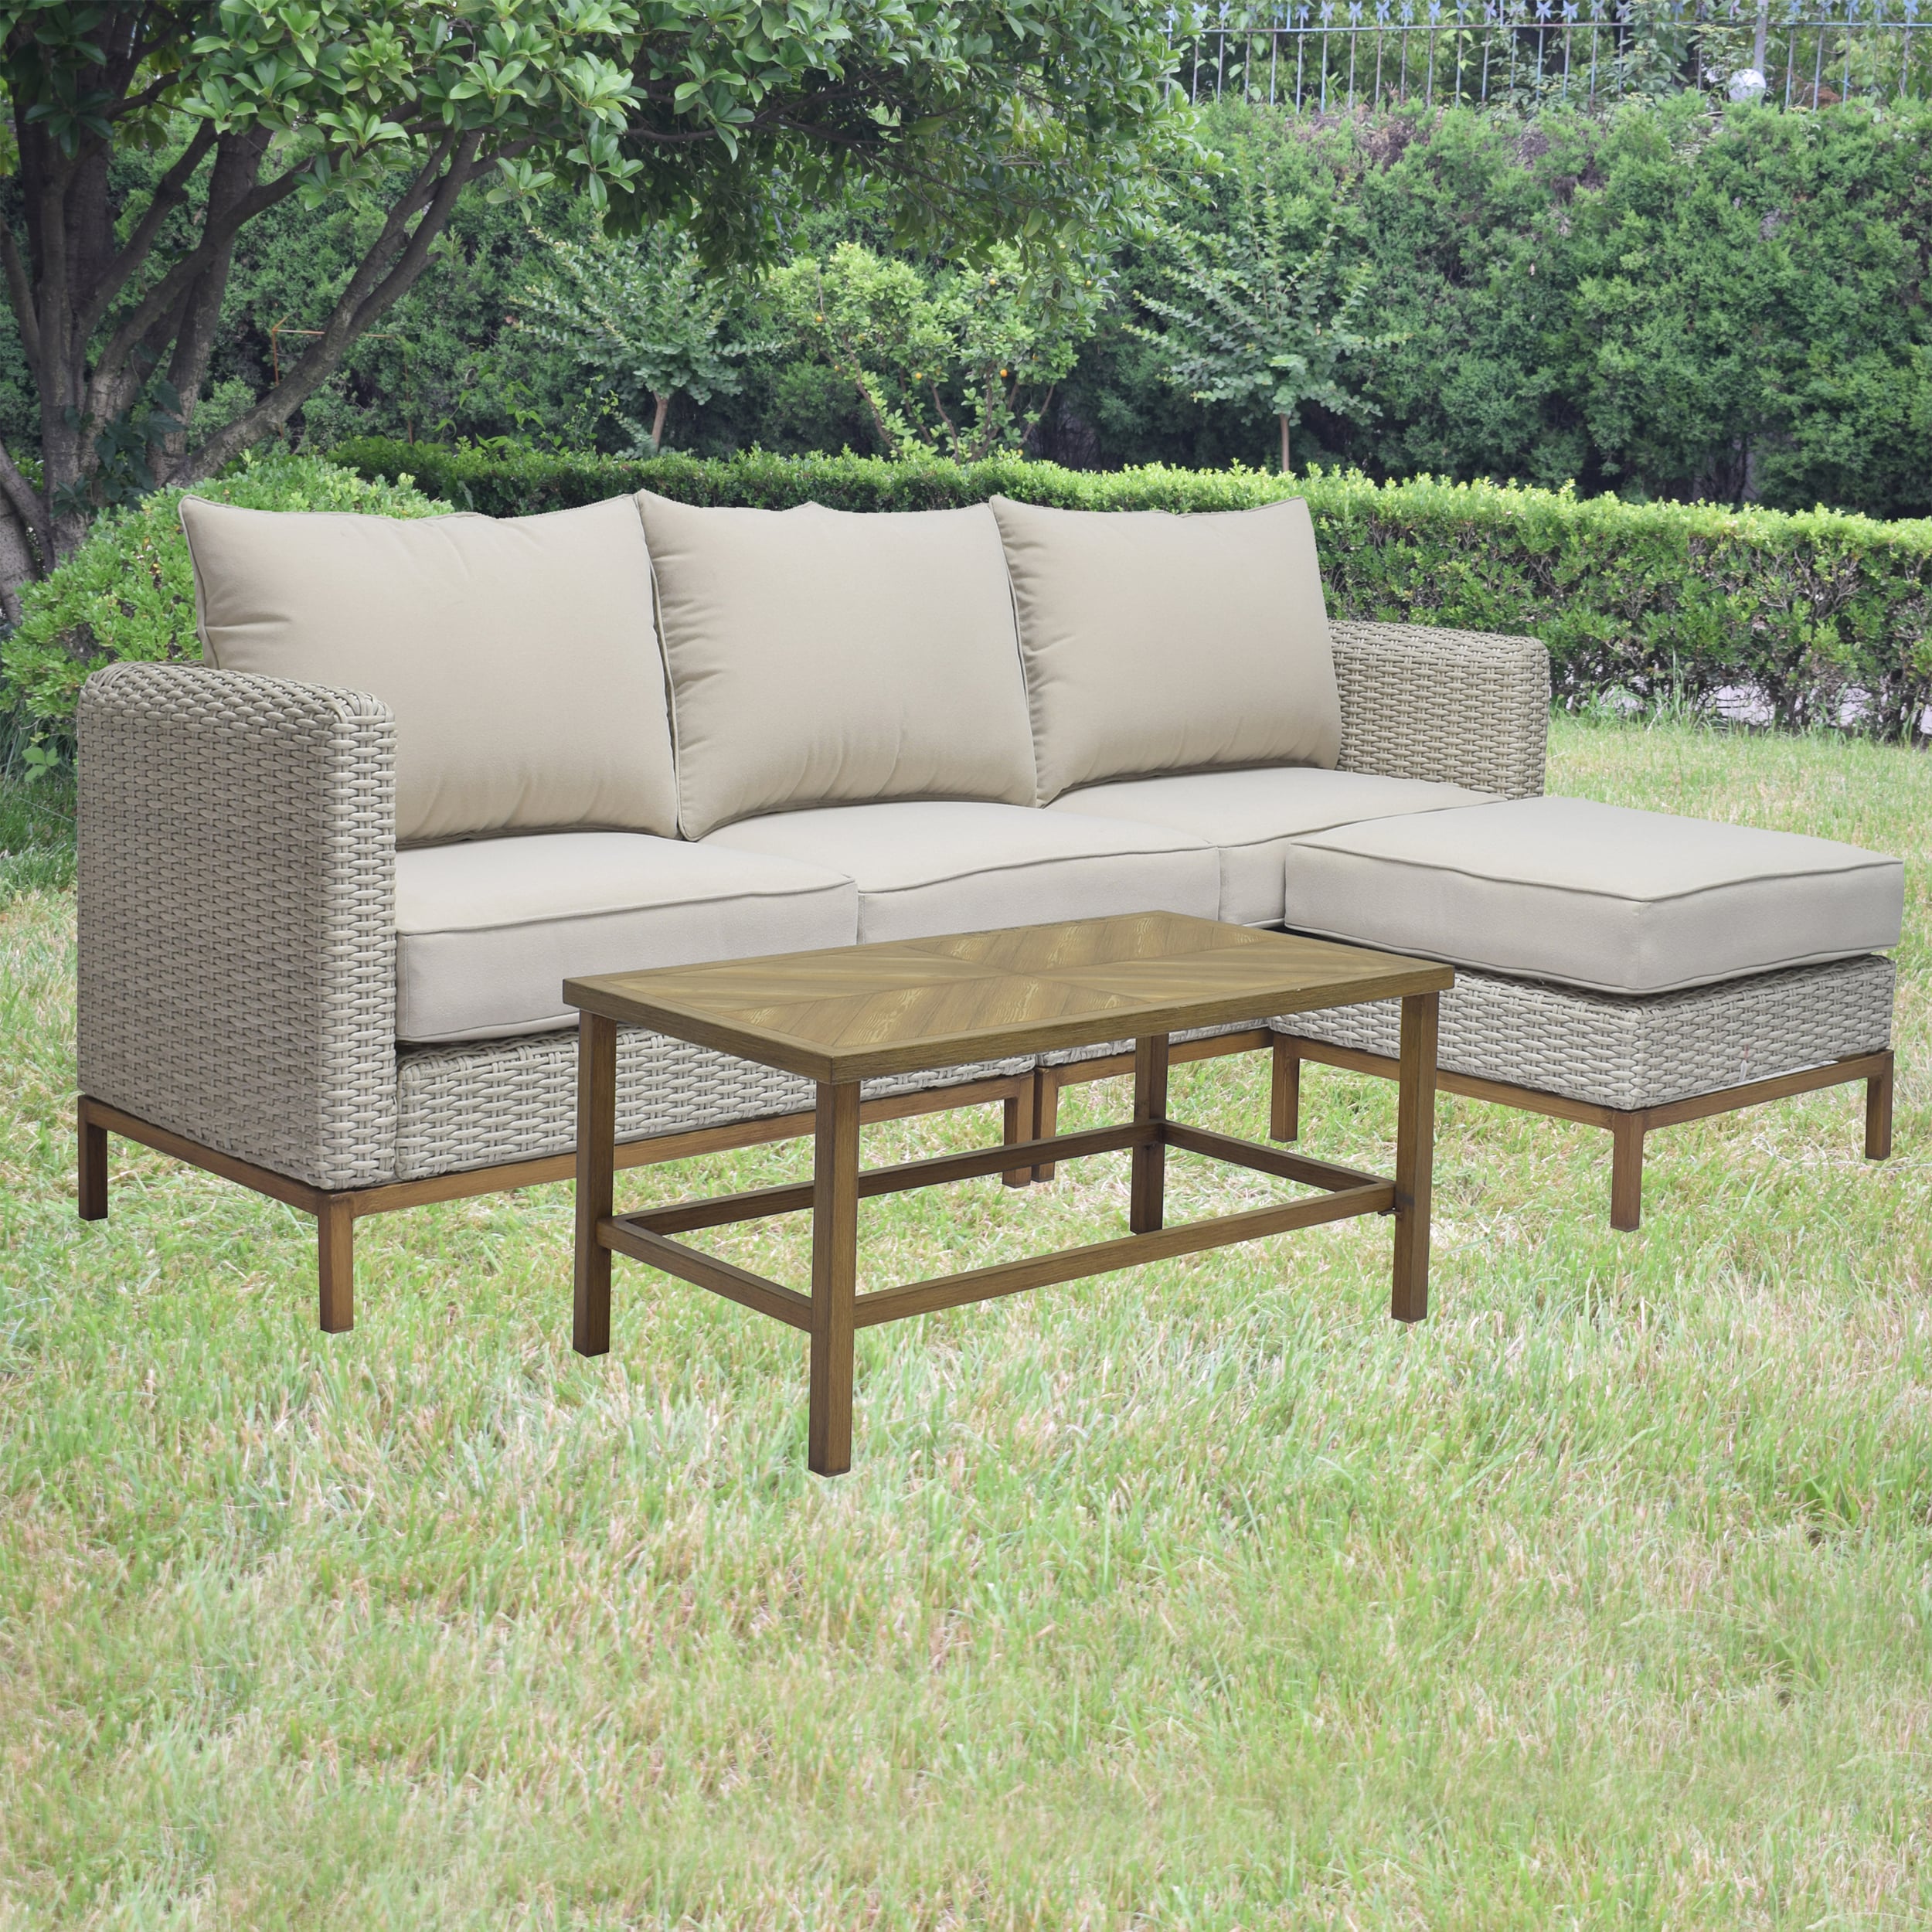 Set Conversation in 21 Conversation Origin Wicker at Sets Cushions department Veda Patio Off-white Springs the with 4-Piece Patio